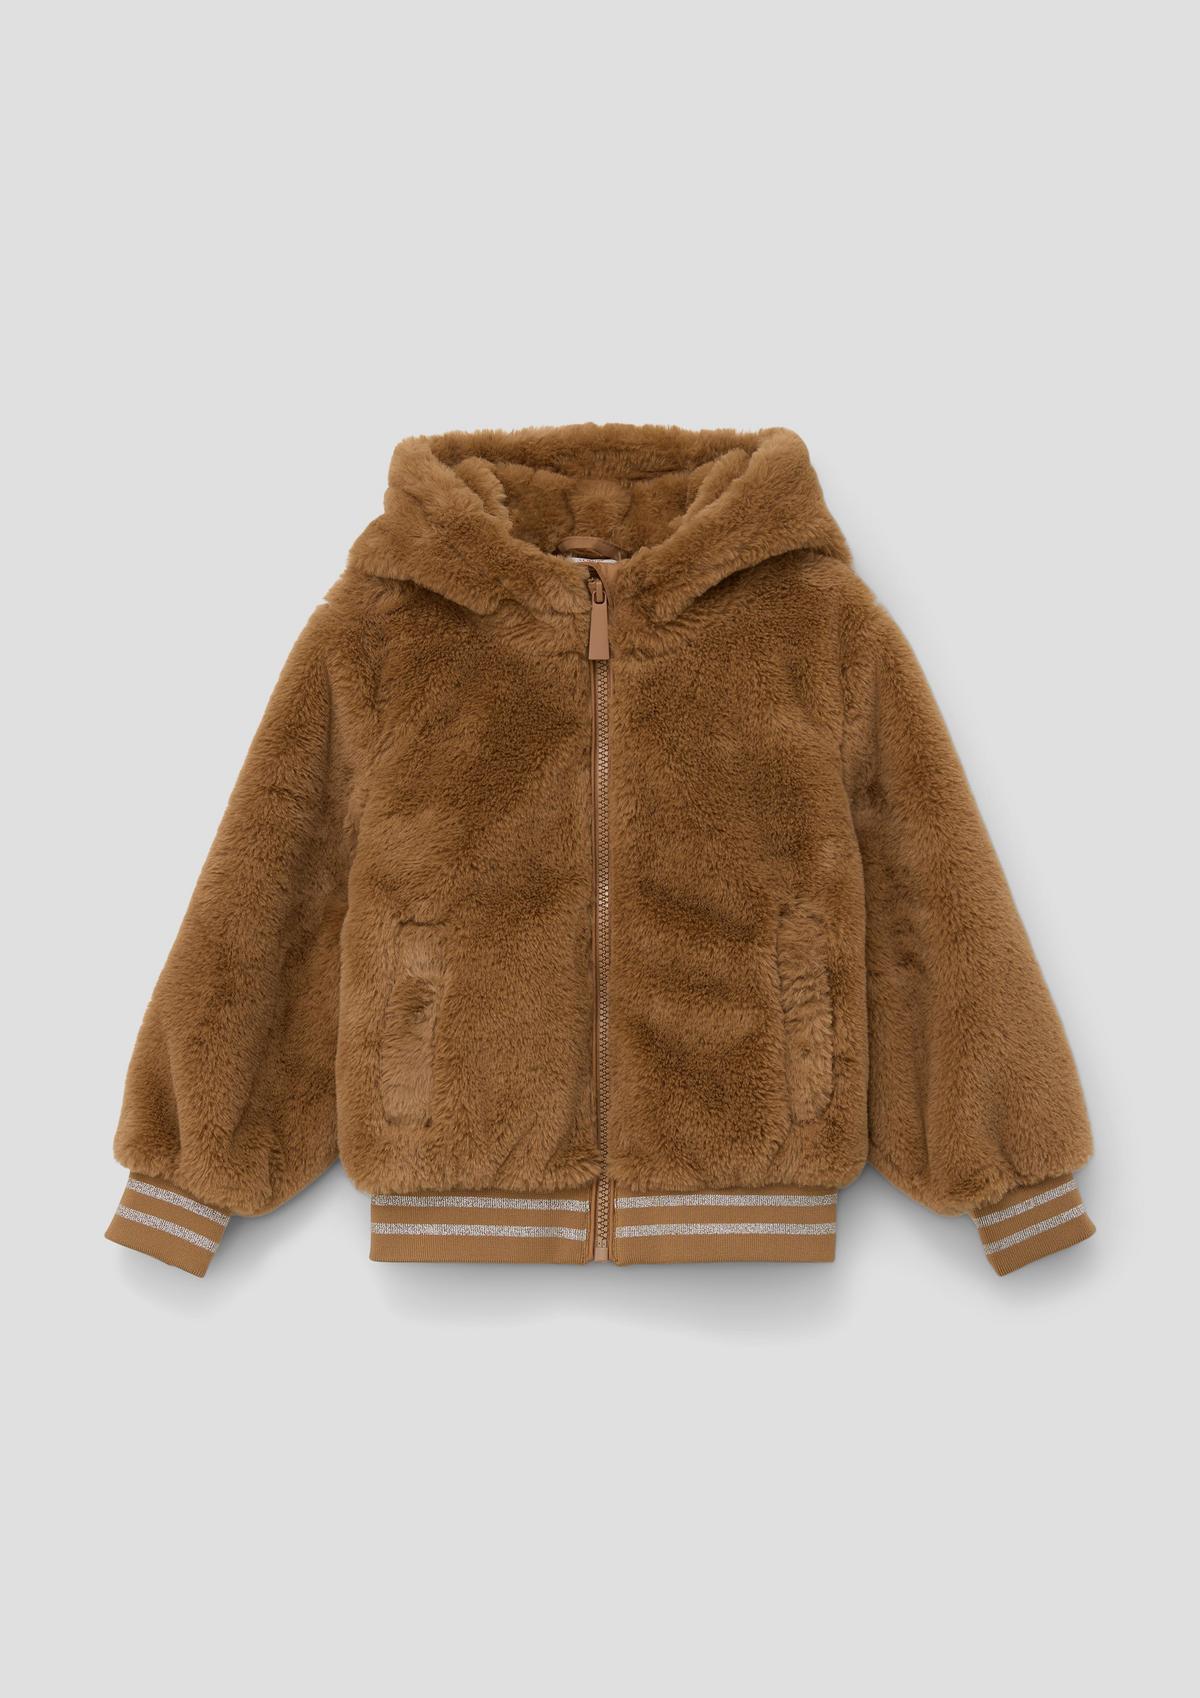 Teddy jacket with a hood - sandstone | s.Oliver